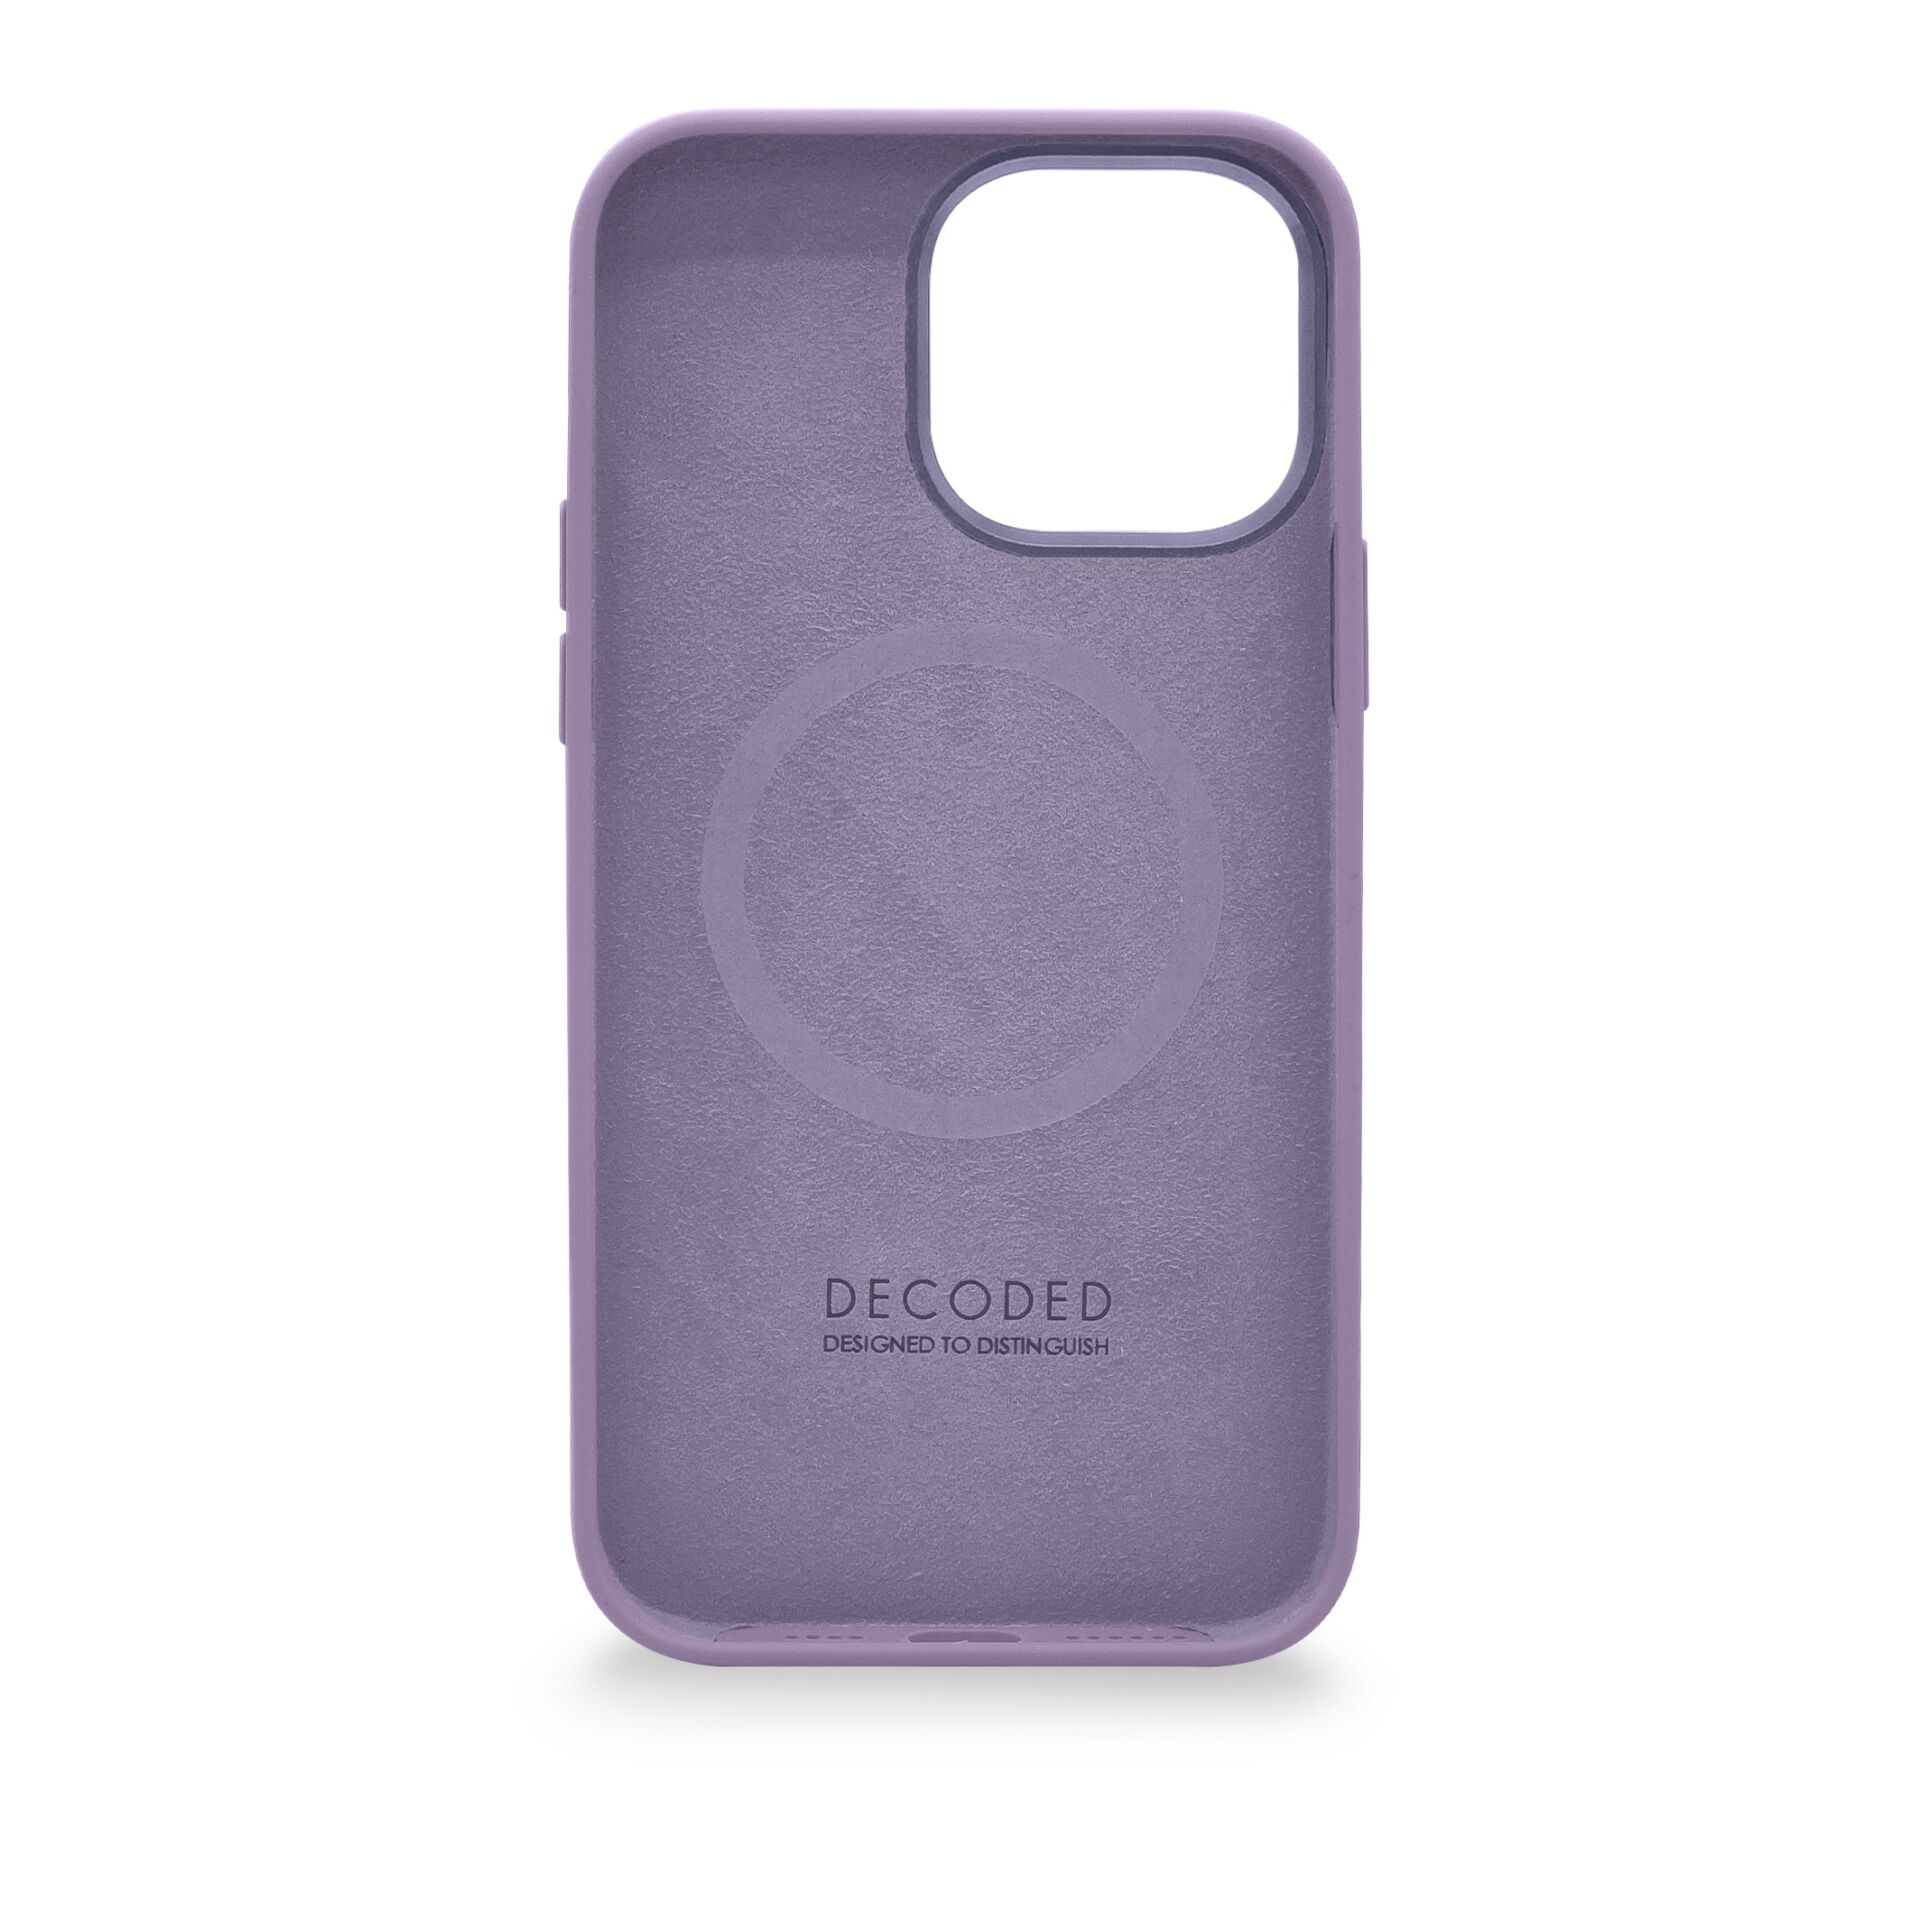 14 Backcover Lavender, DECODED iPhone Lavender AntiMicrobial Silicone Pro Backcover, Max, Apple,